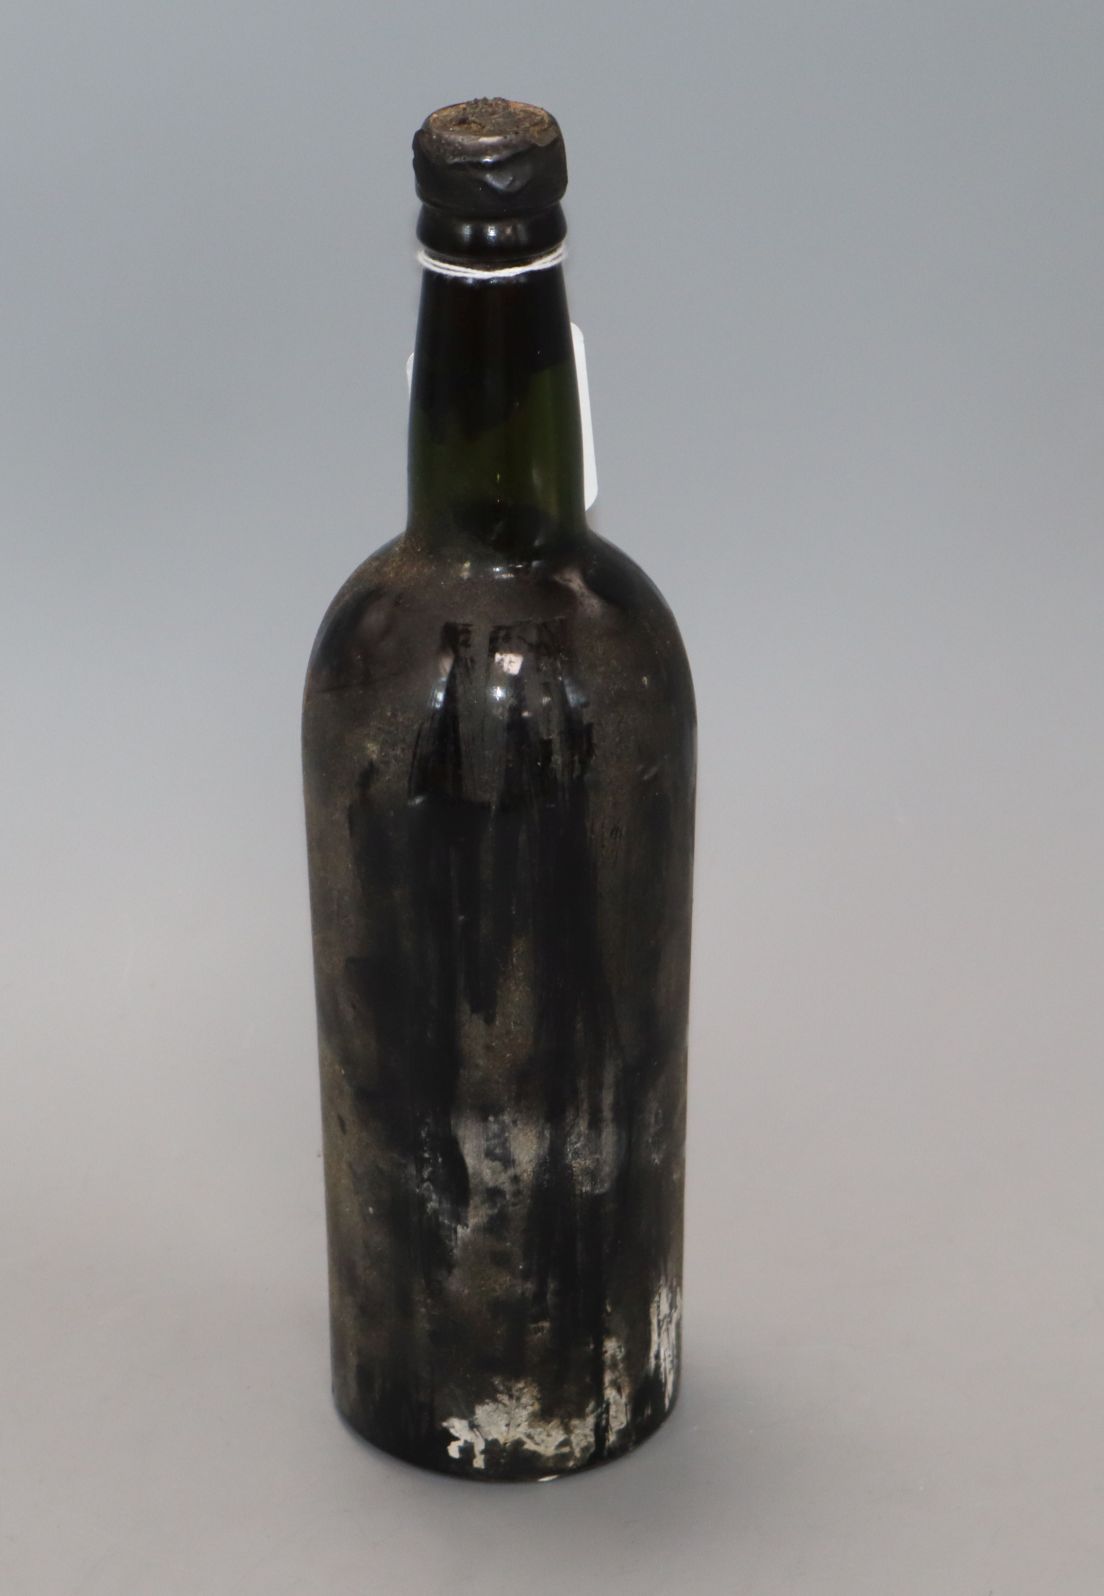 One bottle of a 1940's Warre's vintage port, no label and last number from date missing on seal.